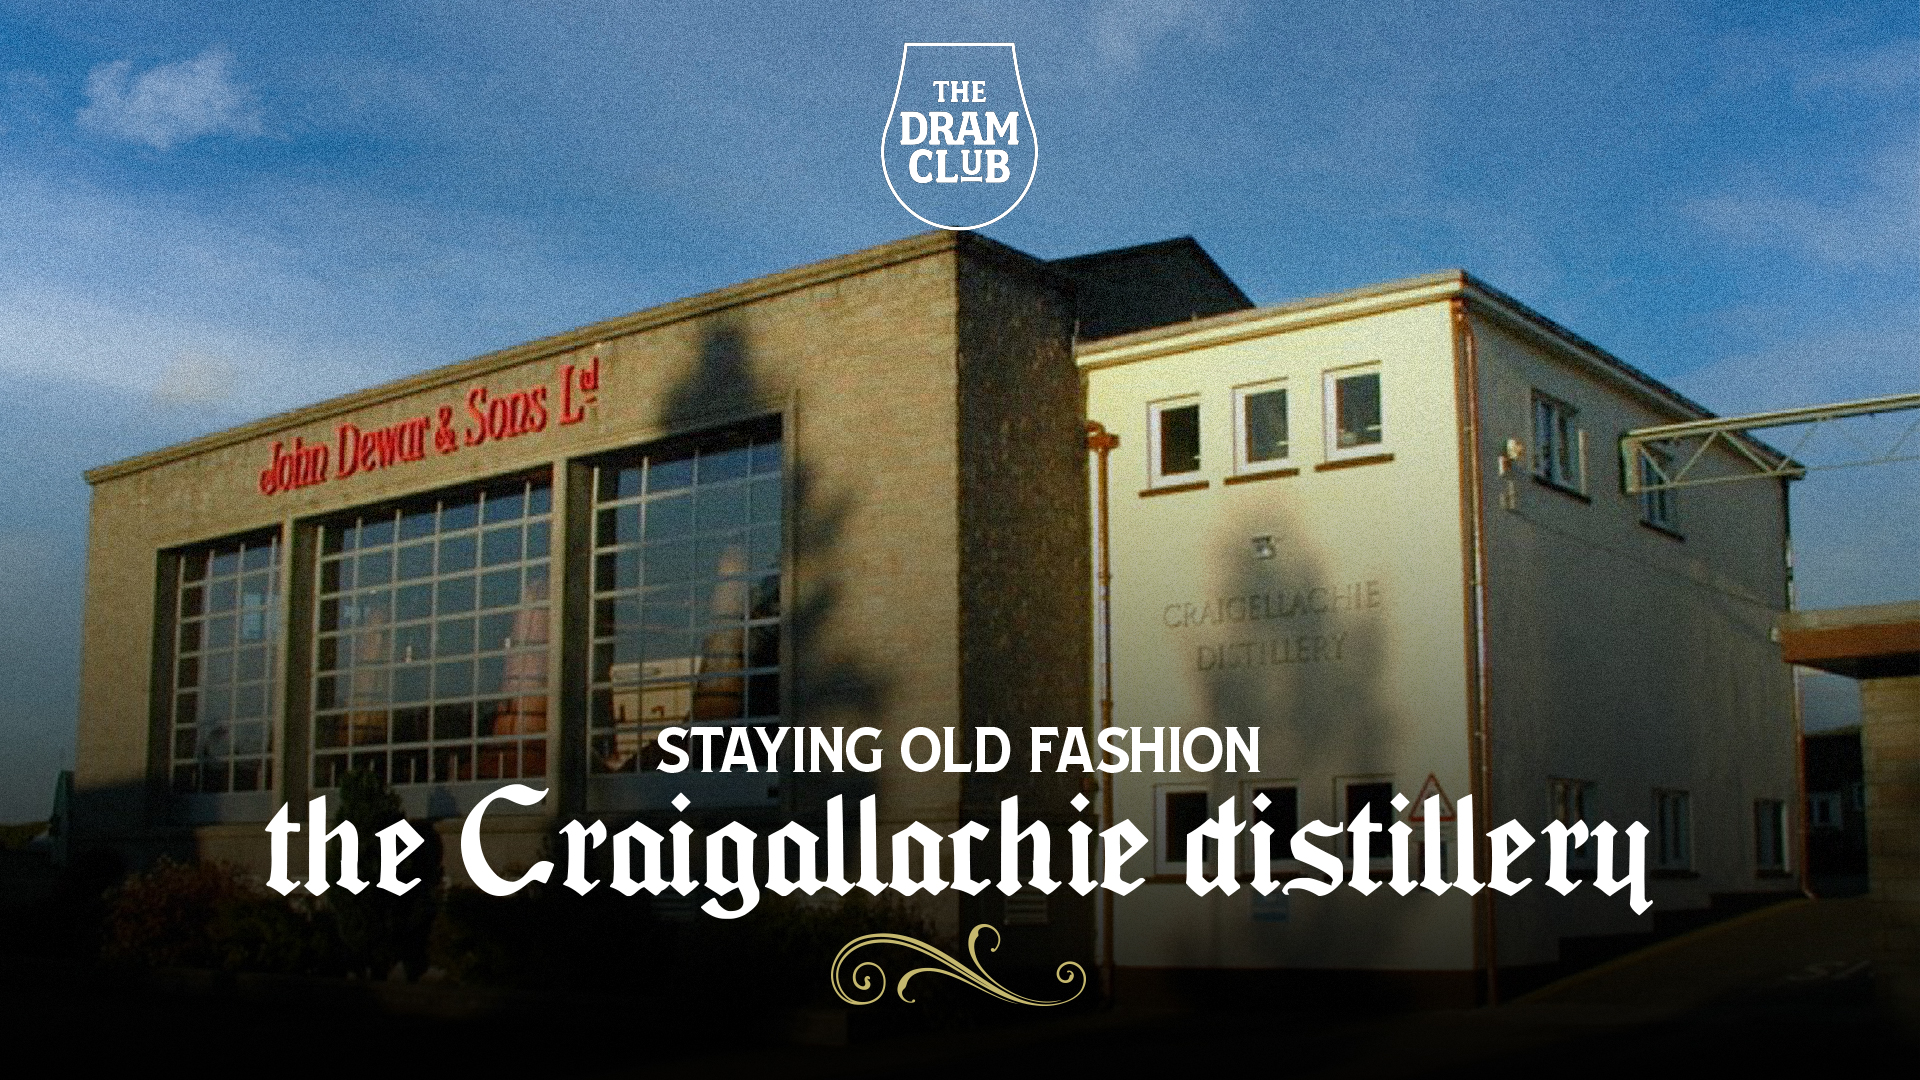 Staying Old Fashion – The Craigellachie Distillery